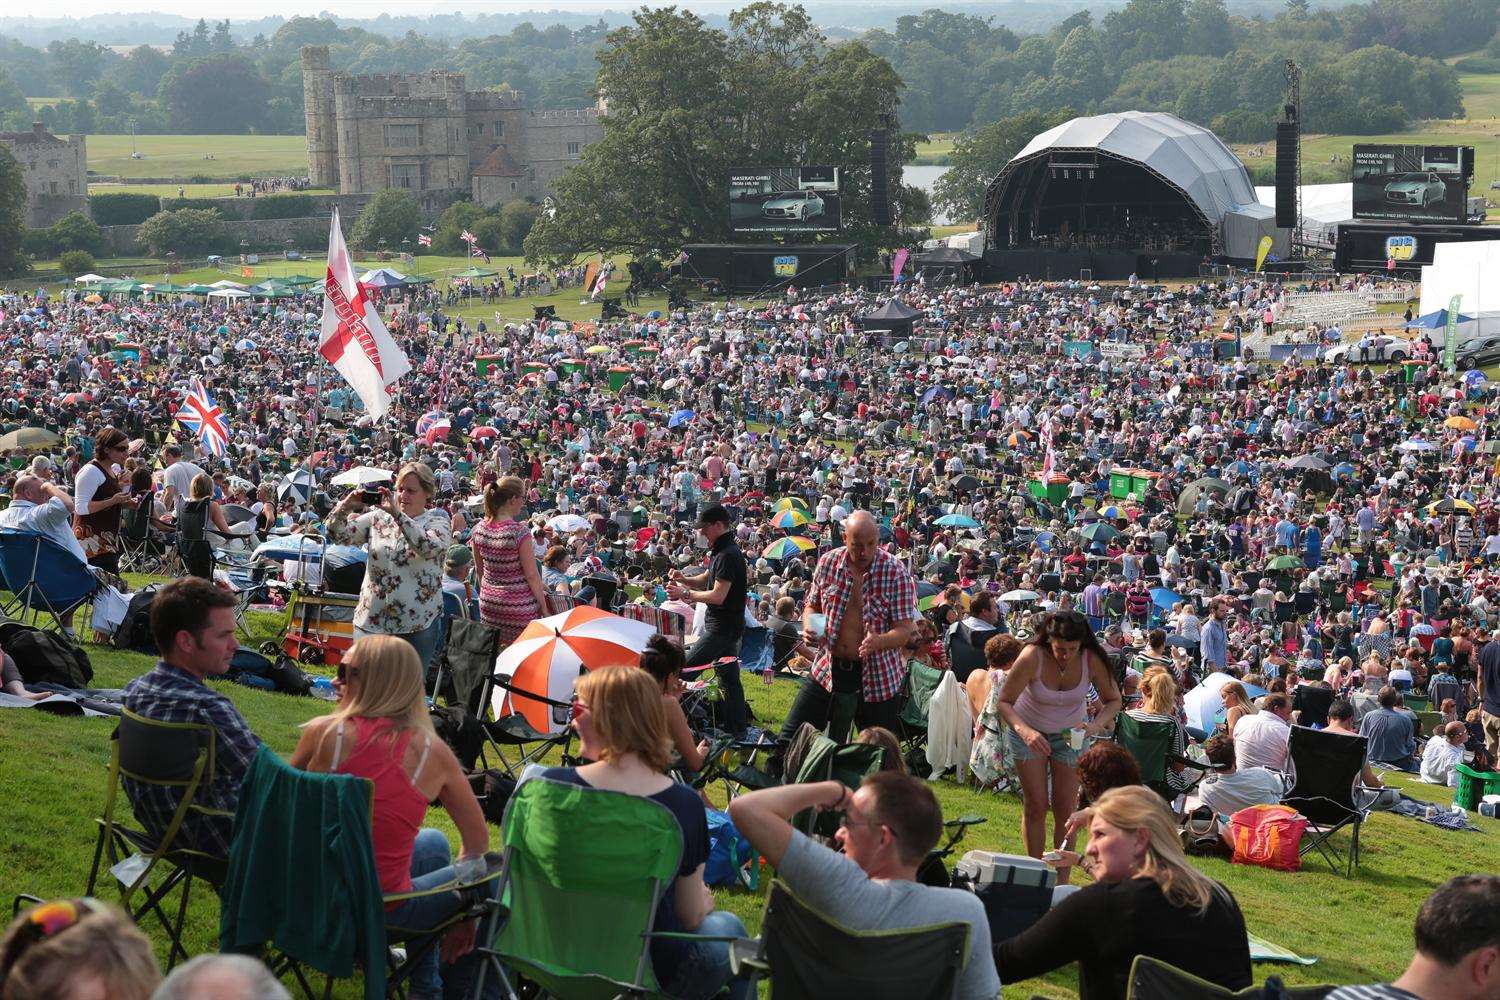 Thousands enjoyed the concert at Leeds this summer